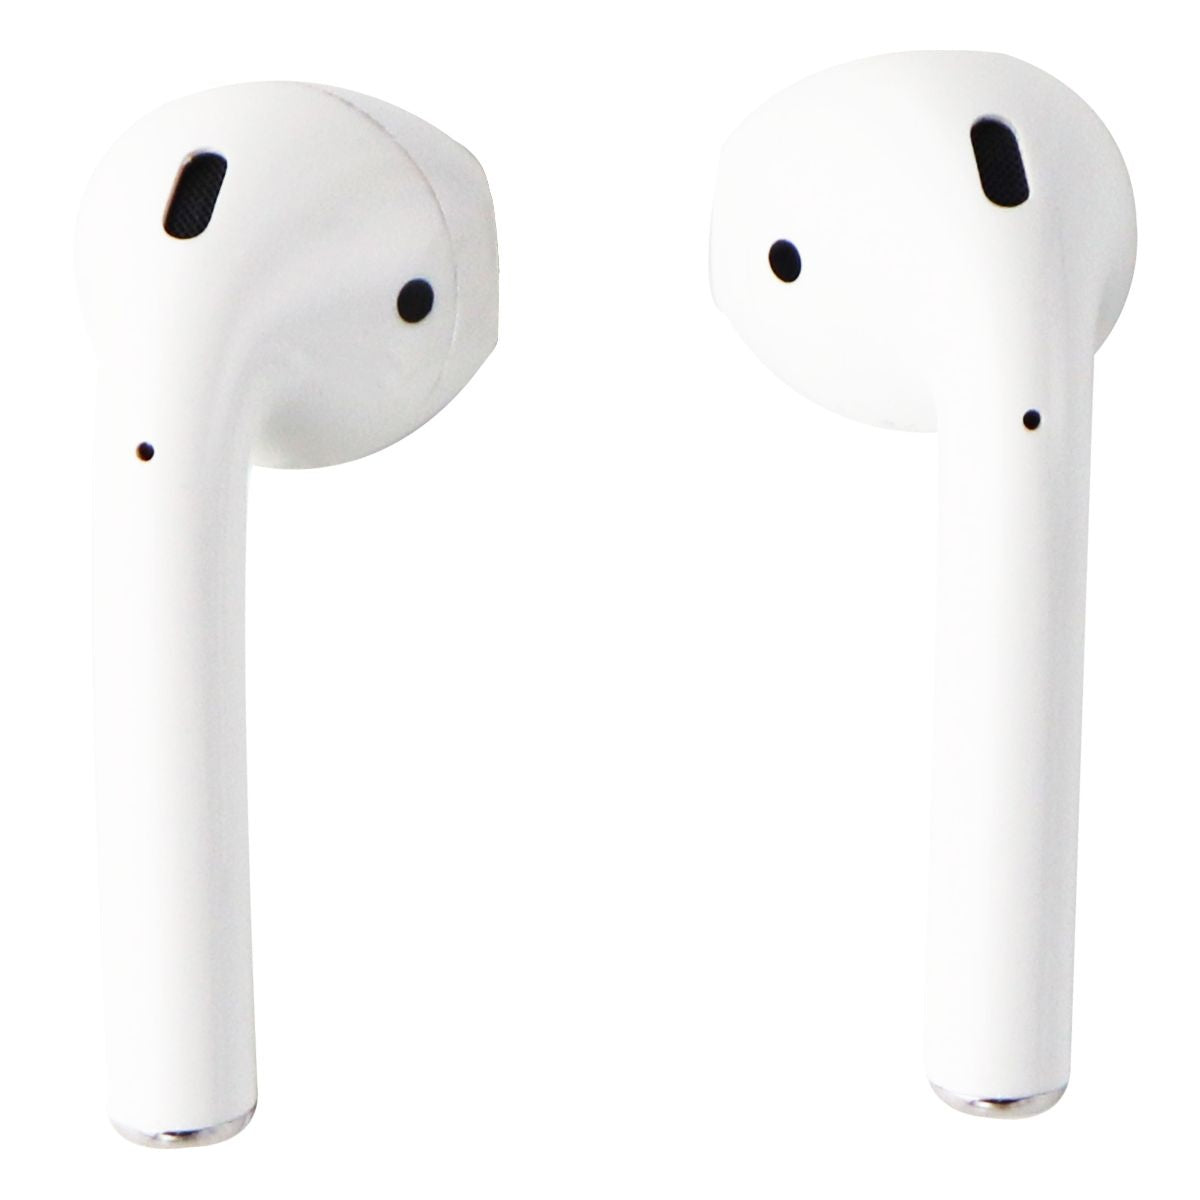 Apple AirPods (2nd Gen) with Charging Case - White (MV7N2AM/A) Portable Audio - Headphones Apple    - Simple Cell Bulk Wholesale Pricing - USA Seller